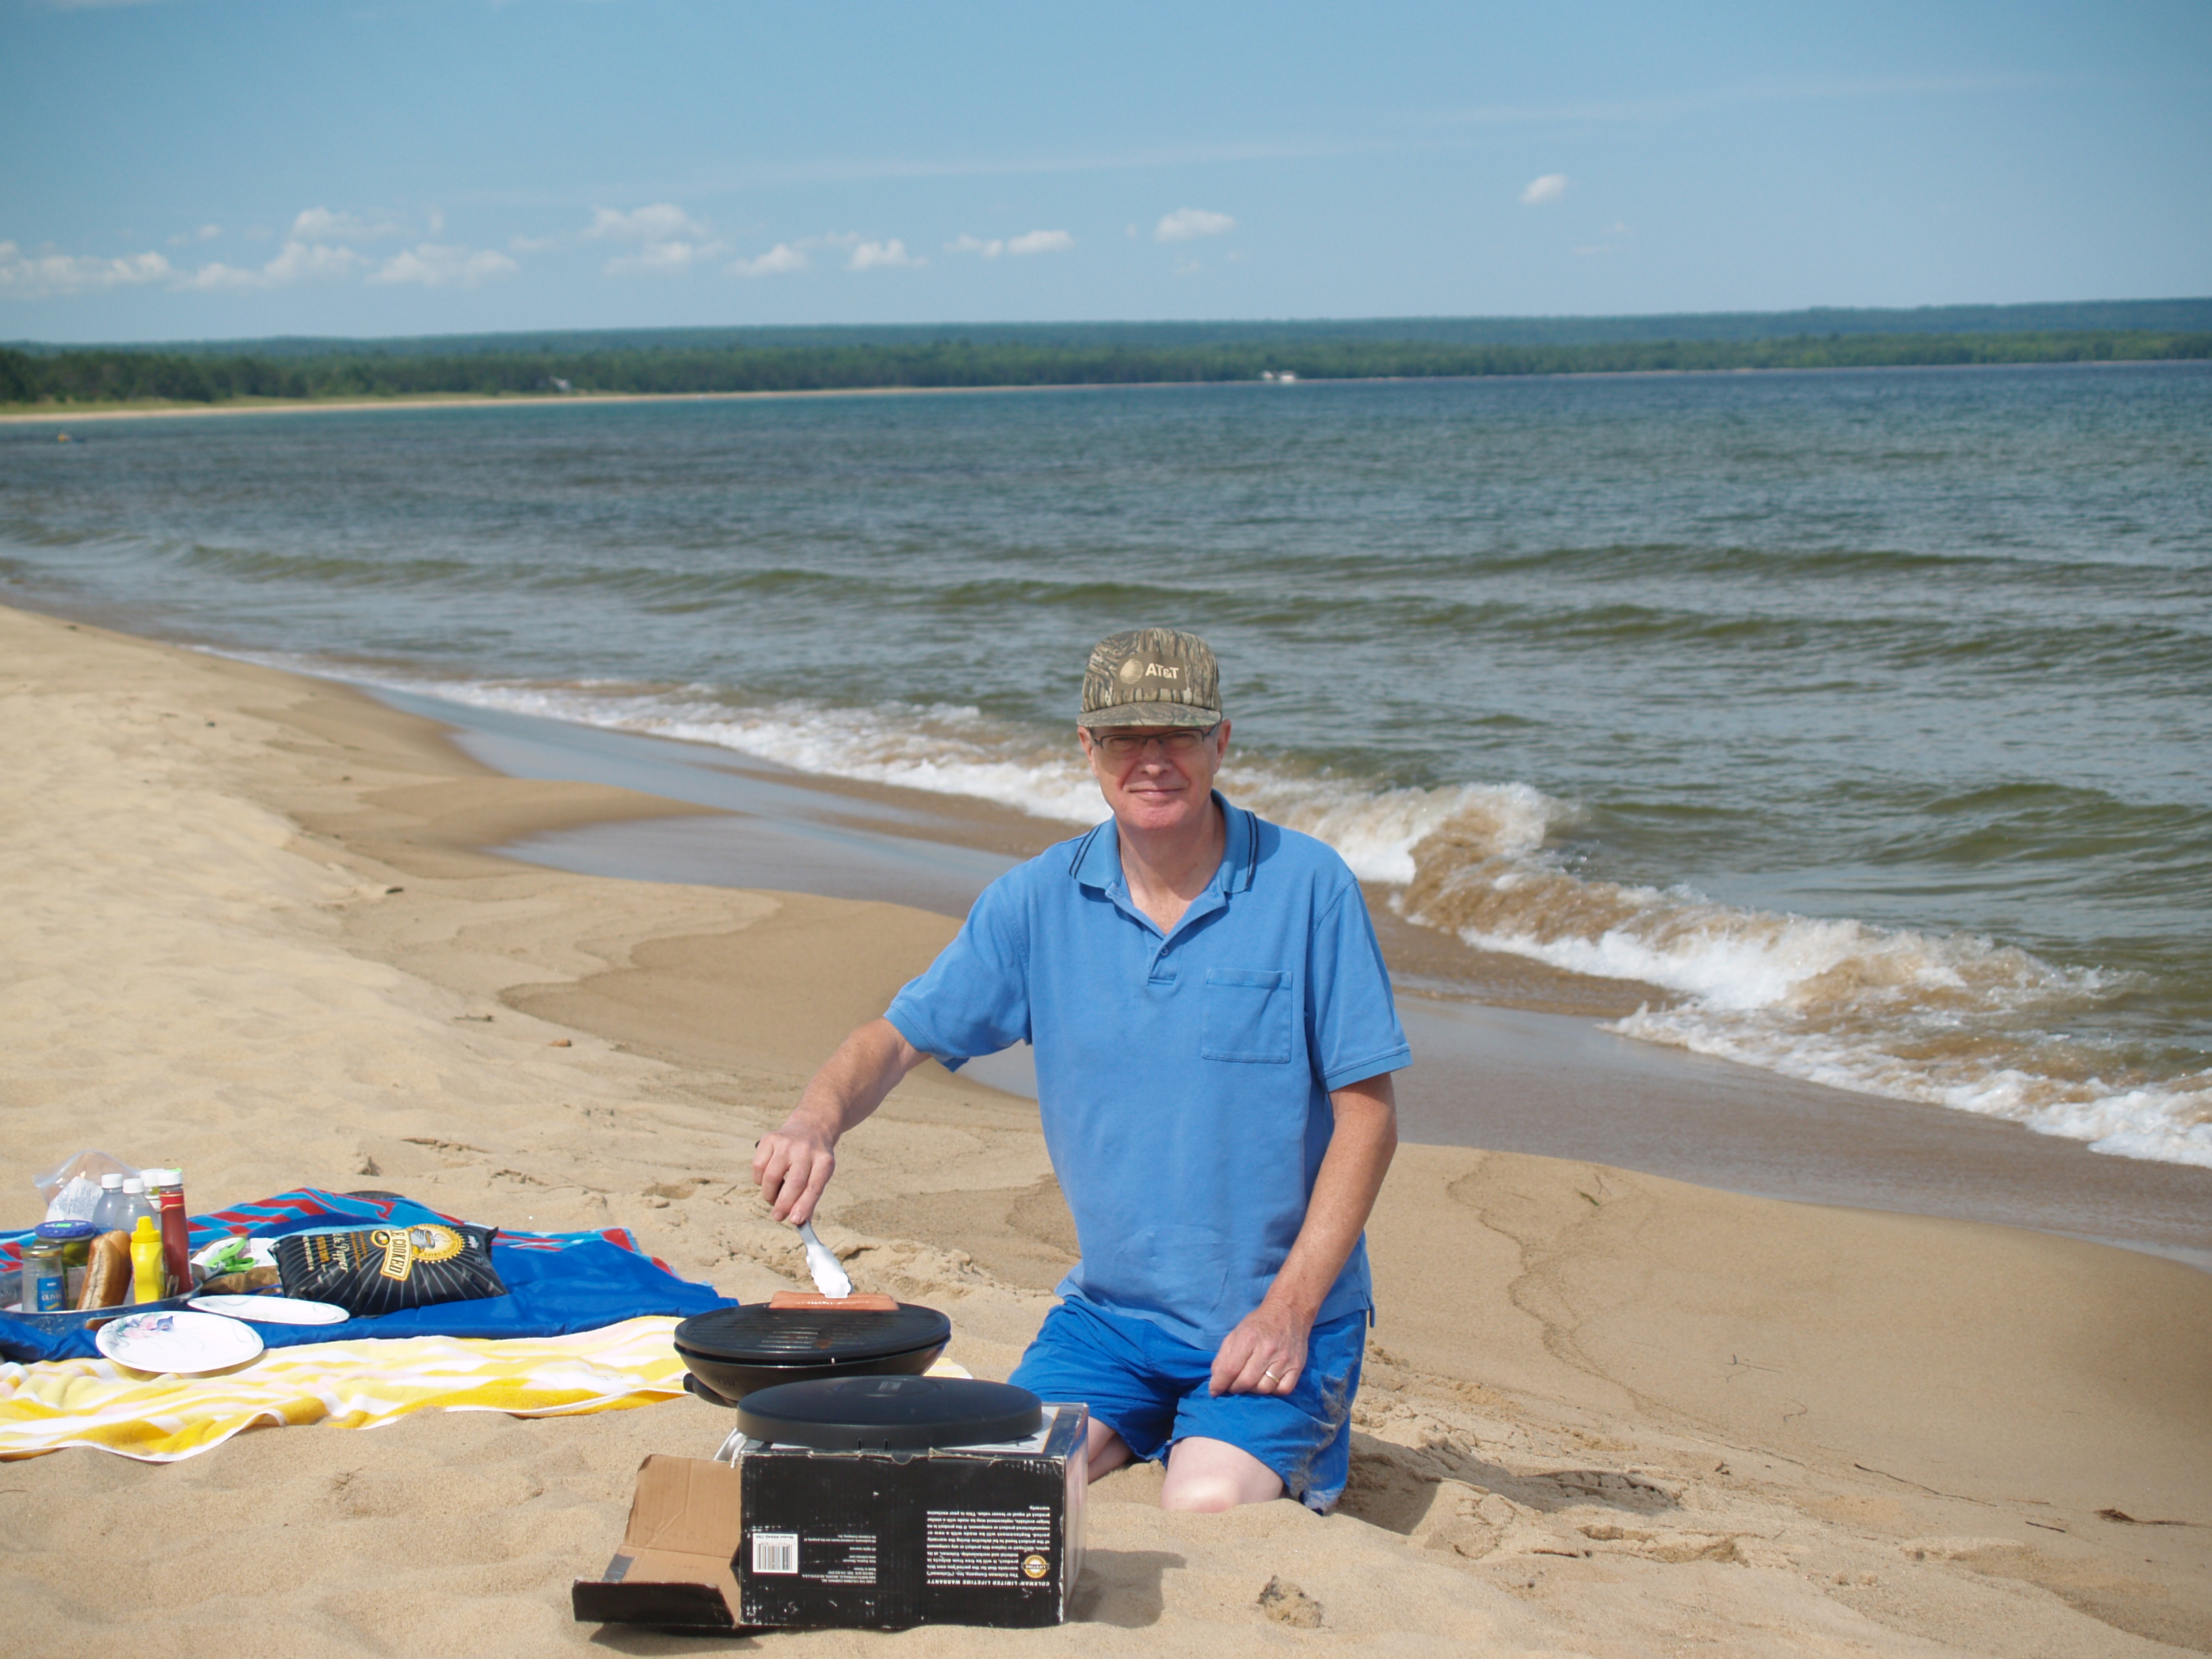 Cooking lunch on the beach, Lake Superior